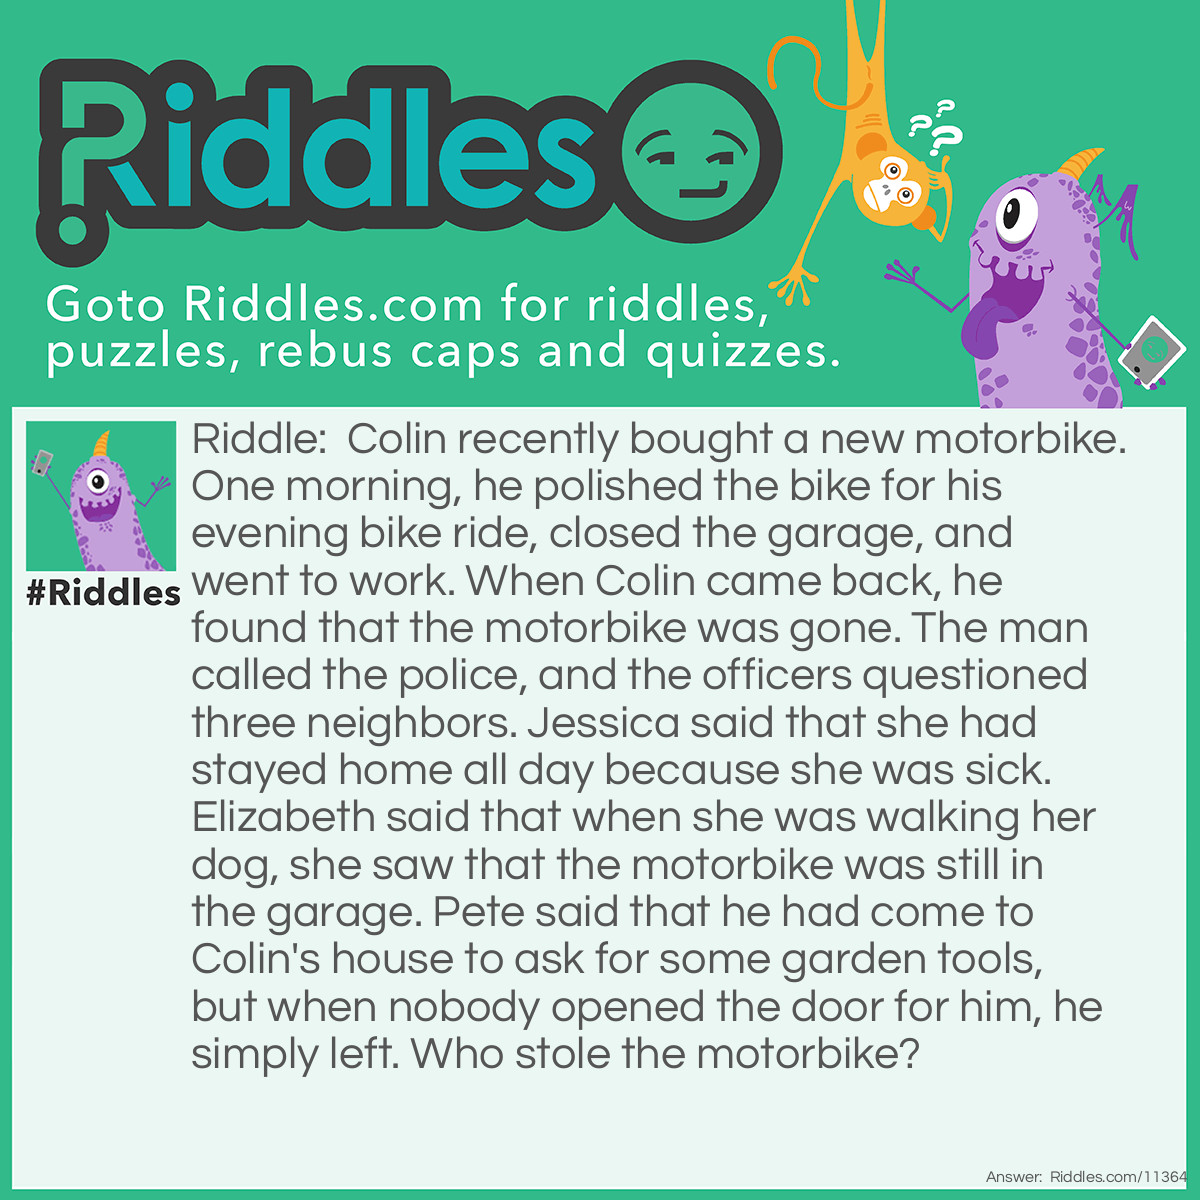 Riddle: Colin recently bought a new motorbike. One morning, he polished the bike for his evening bike ride, closed the garage, and went to work. When Colin came back, he found that the motorbike was gone. The man called the police, and the officers questioned three neighbors. Jessica said that she had stayed home all day because she was sick. Elizabeth said that when she was walking her dog, she saw that the motorbike was still in the garage. Pete said that he had come to Colin's house to ask for some garden tools, but when nobody opened the door for him, he simply left. Who stole the motorbike? Answer: Elizabeth stole the motorbike. She couldn't possibly see that the bike was still in the garage because Colin closed the garage before leaving to go to work.